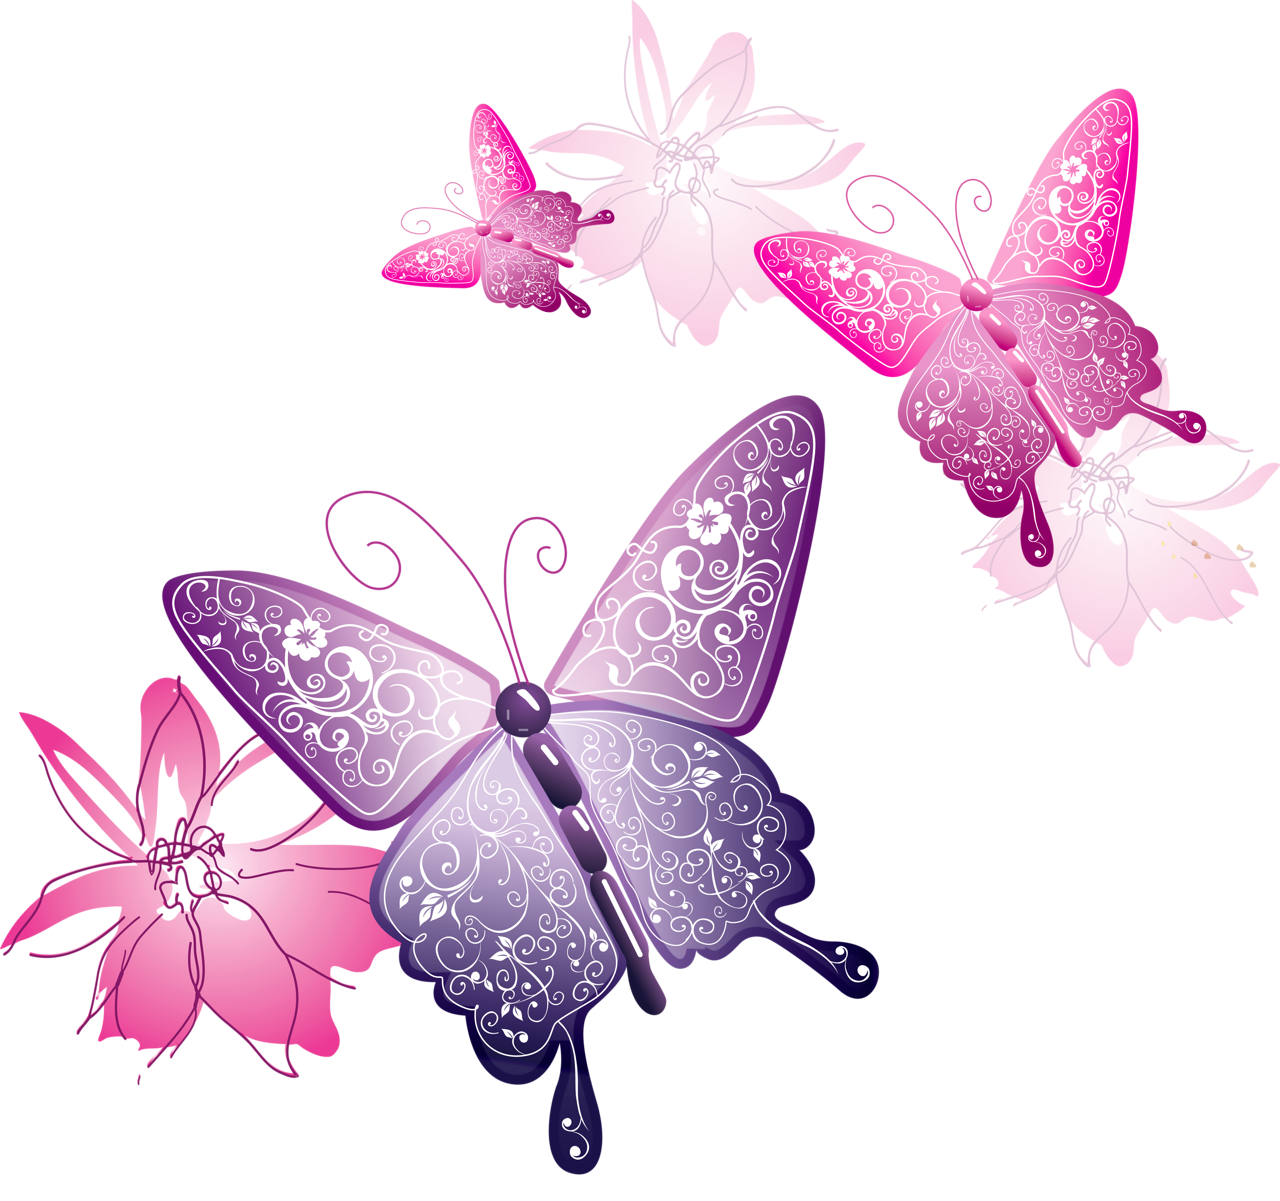 Free Butterflies Cliparts, Download Free Clip Art, Free Clip